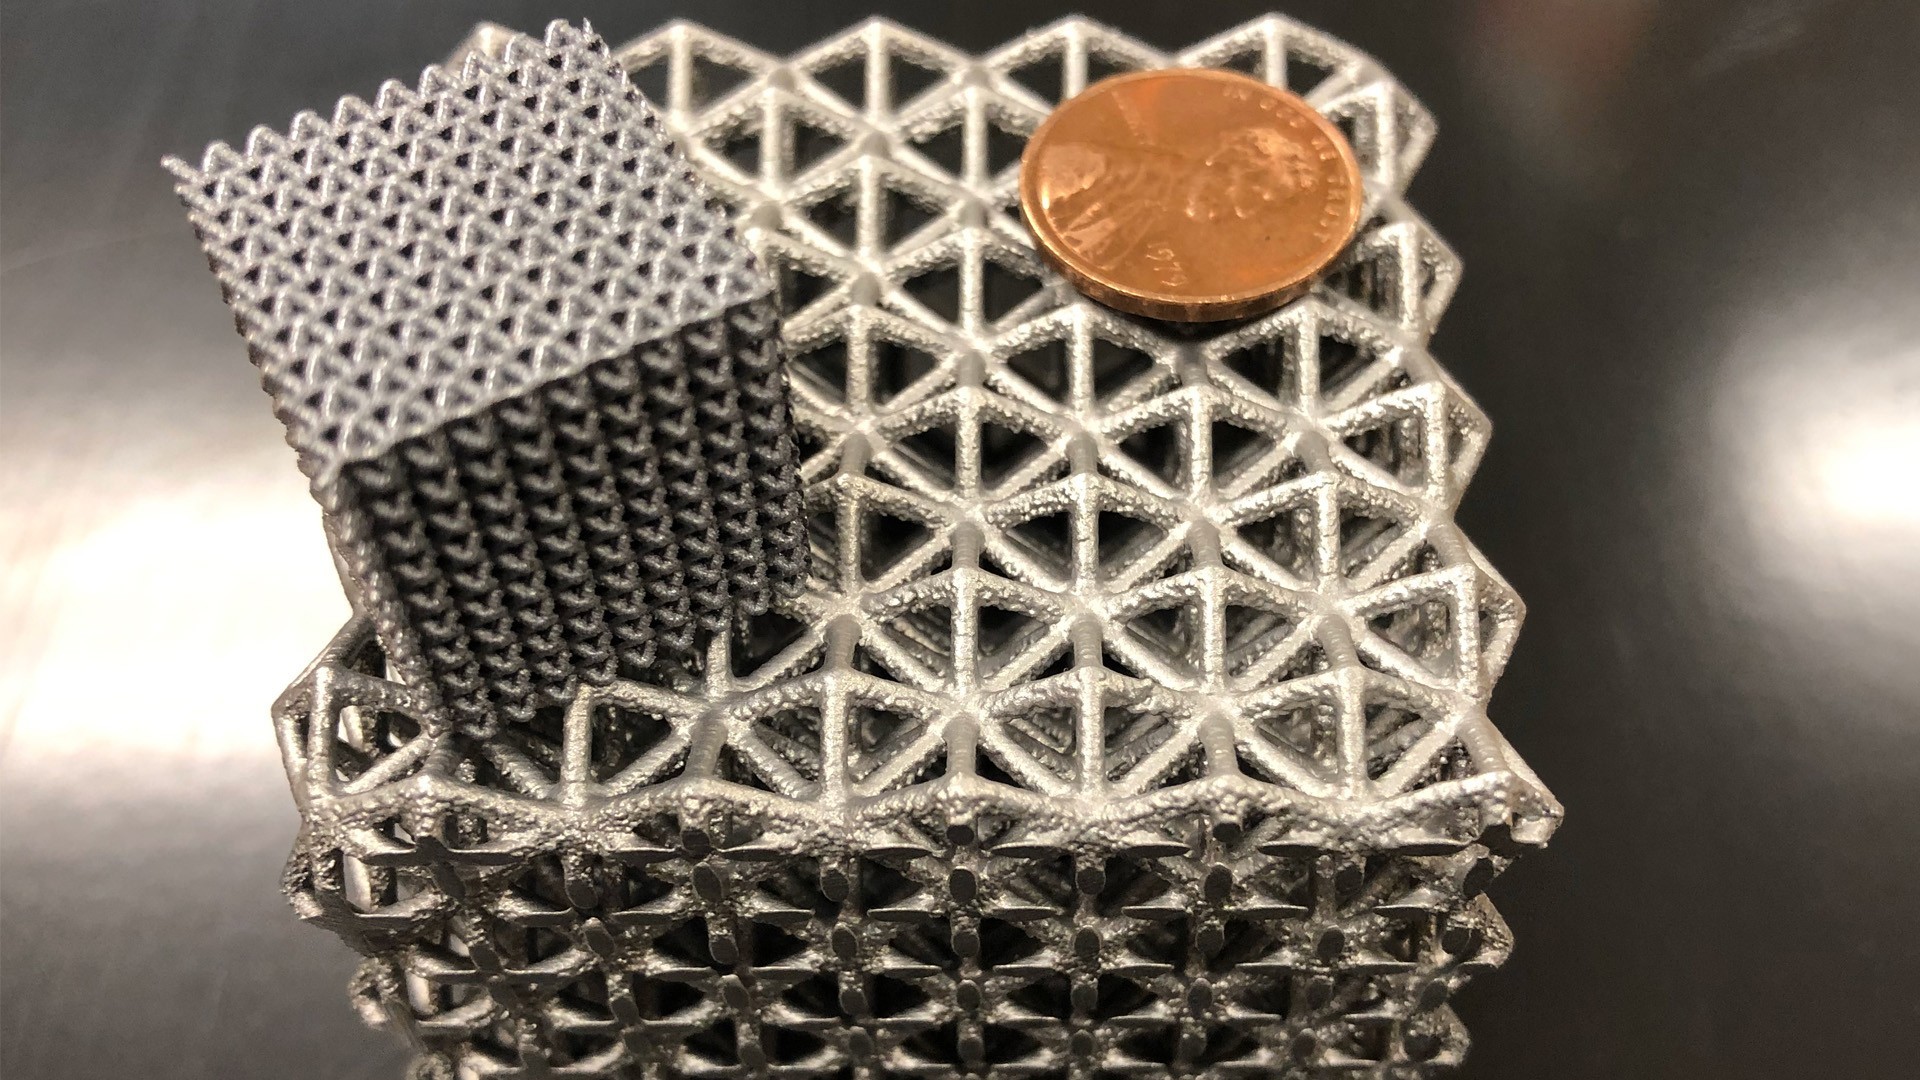 Plans are to improve the AM of a high-strength magnesium alloy by increasing the density enough to make 24 micro-lattice structures.